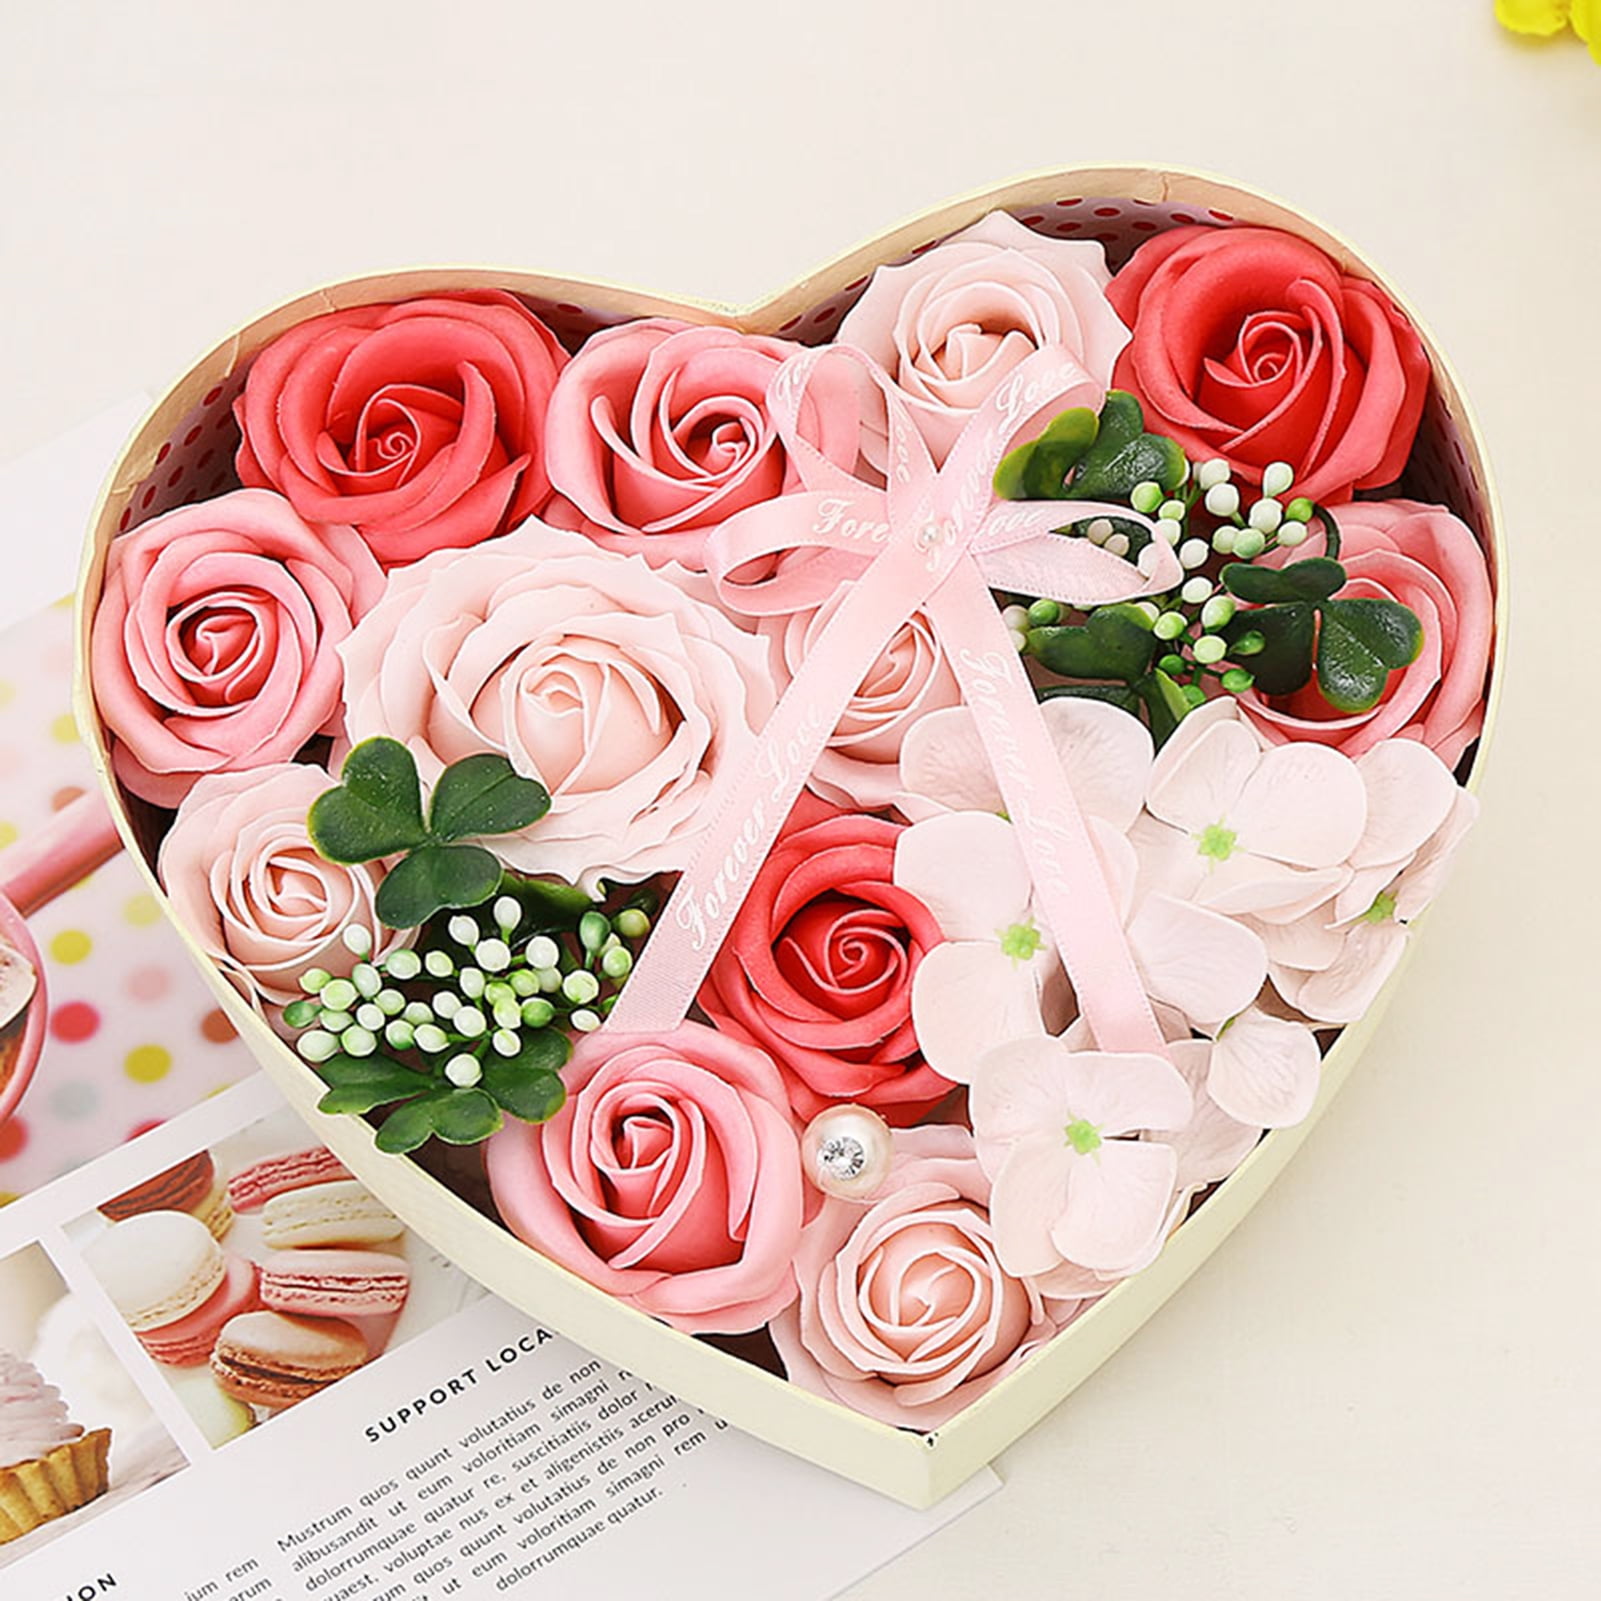 Valentines Day And Heart Shaped Wedding Bouquet Gift: Small Rose Box For Wrapping  Flowers Supplies For Love From Mmjyt, $30.62